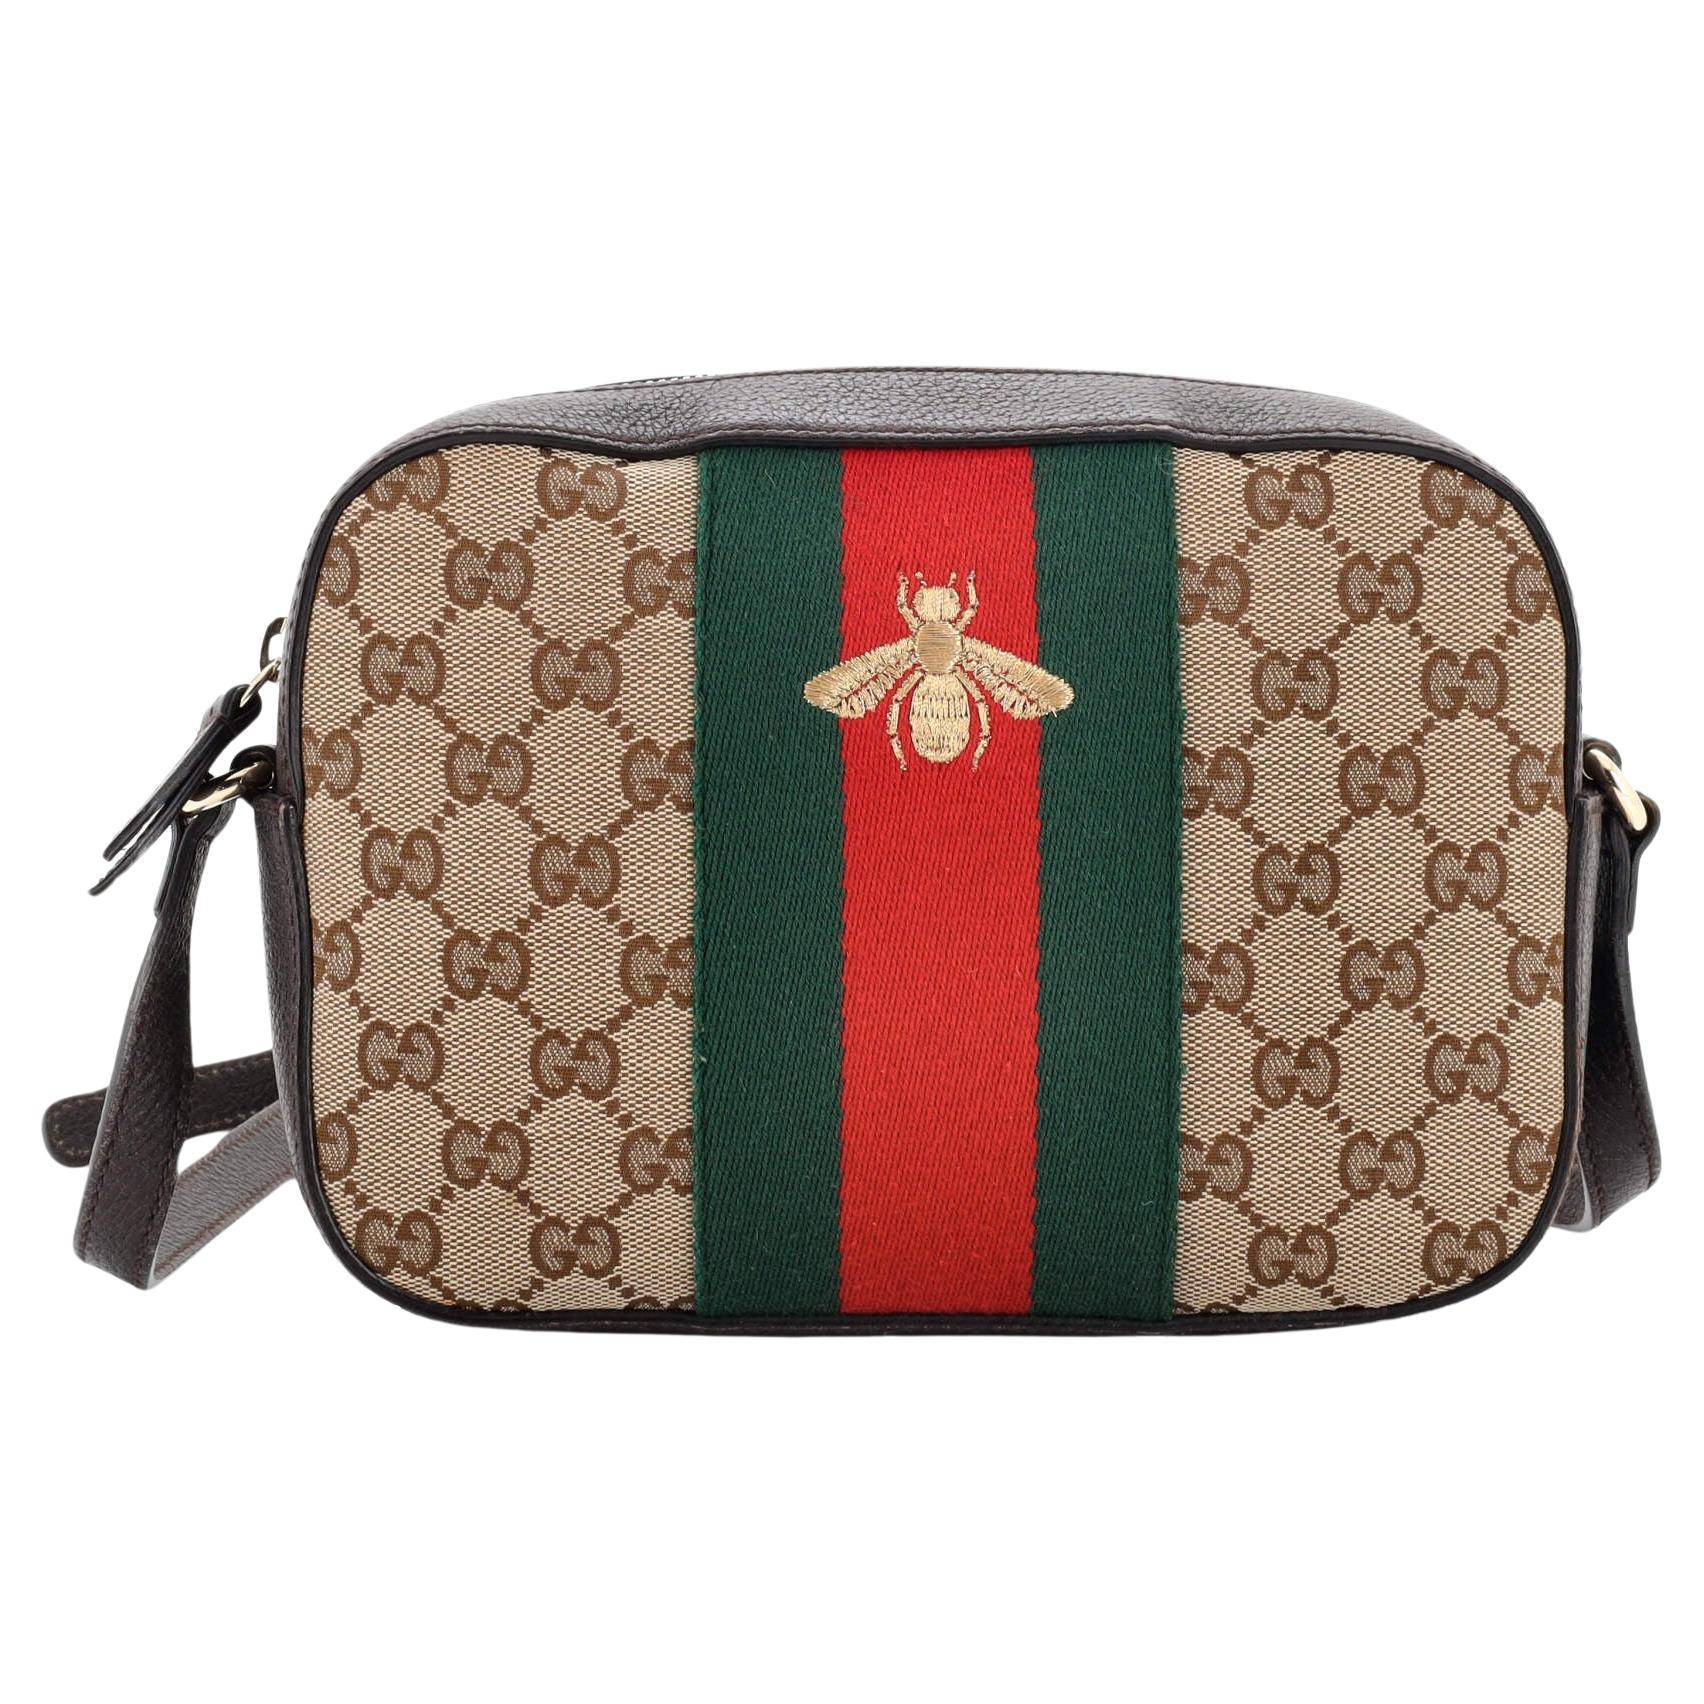 Gucci Line Bee-Embroidered Leather Cross-Body Bag in Brown